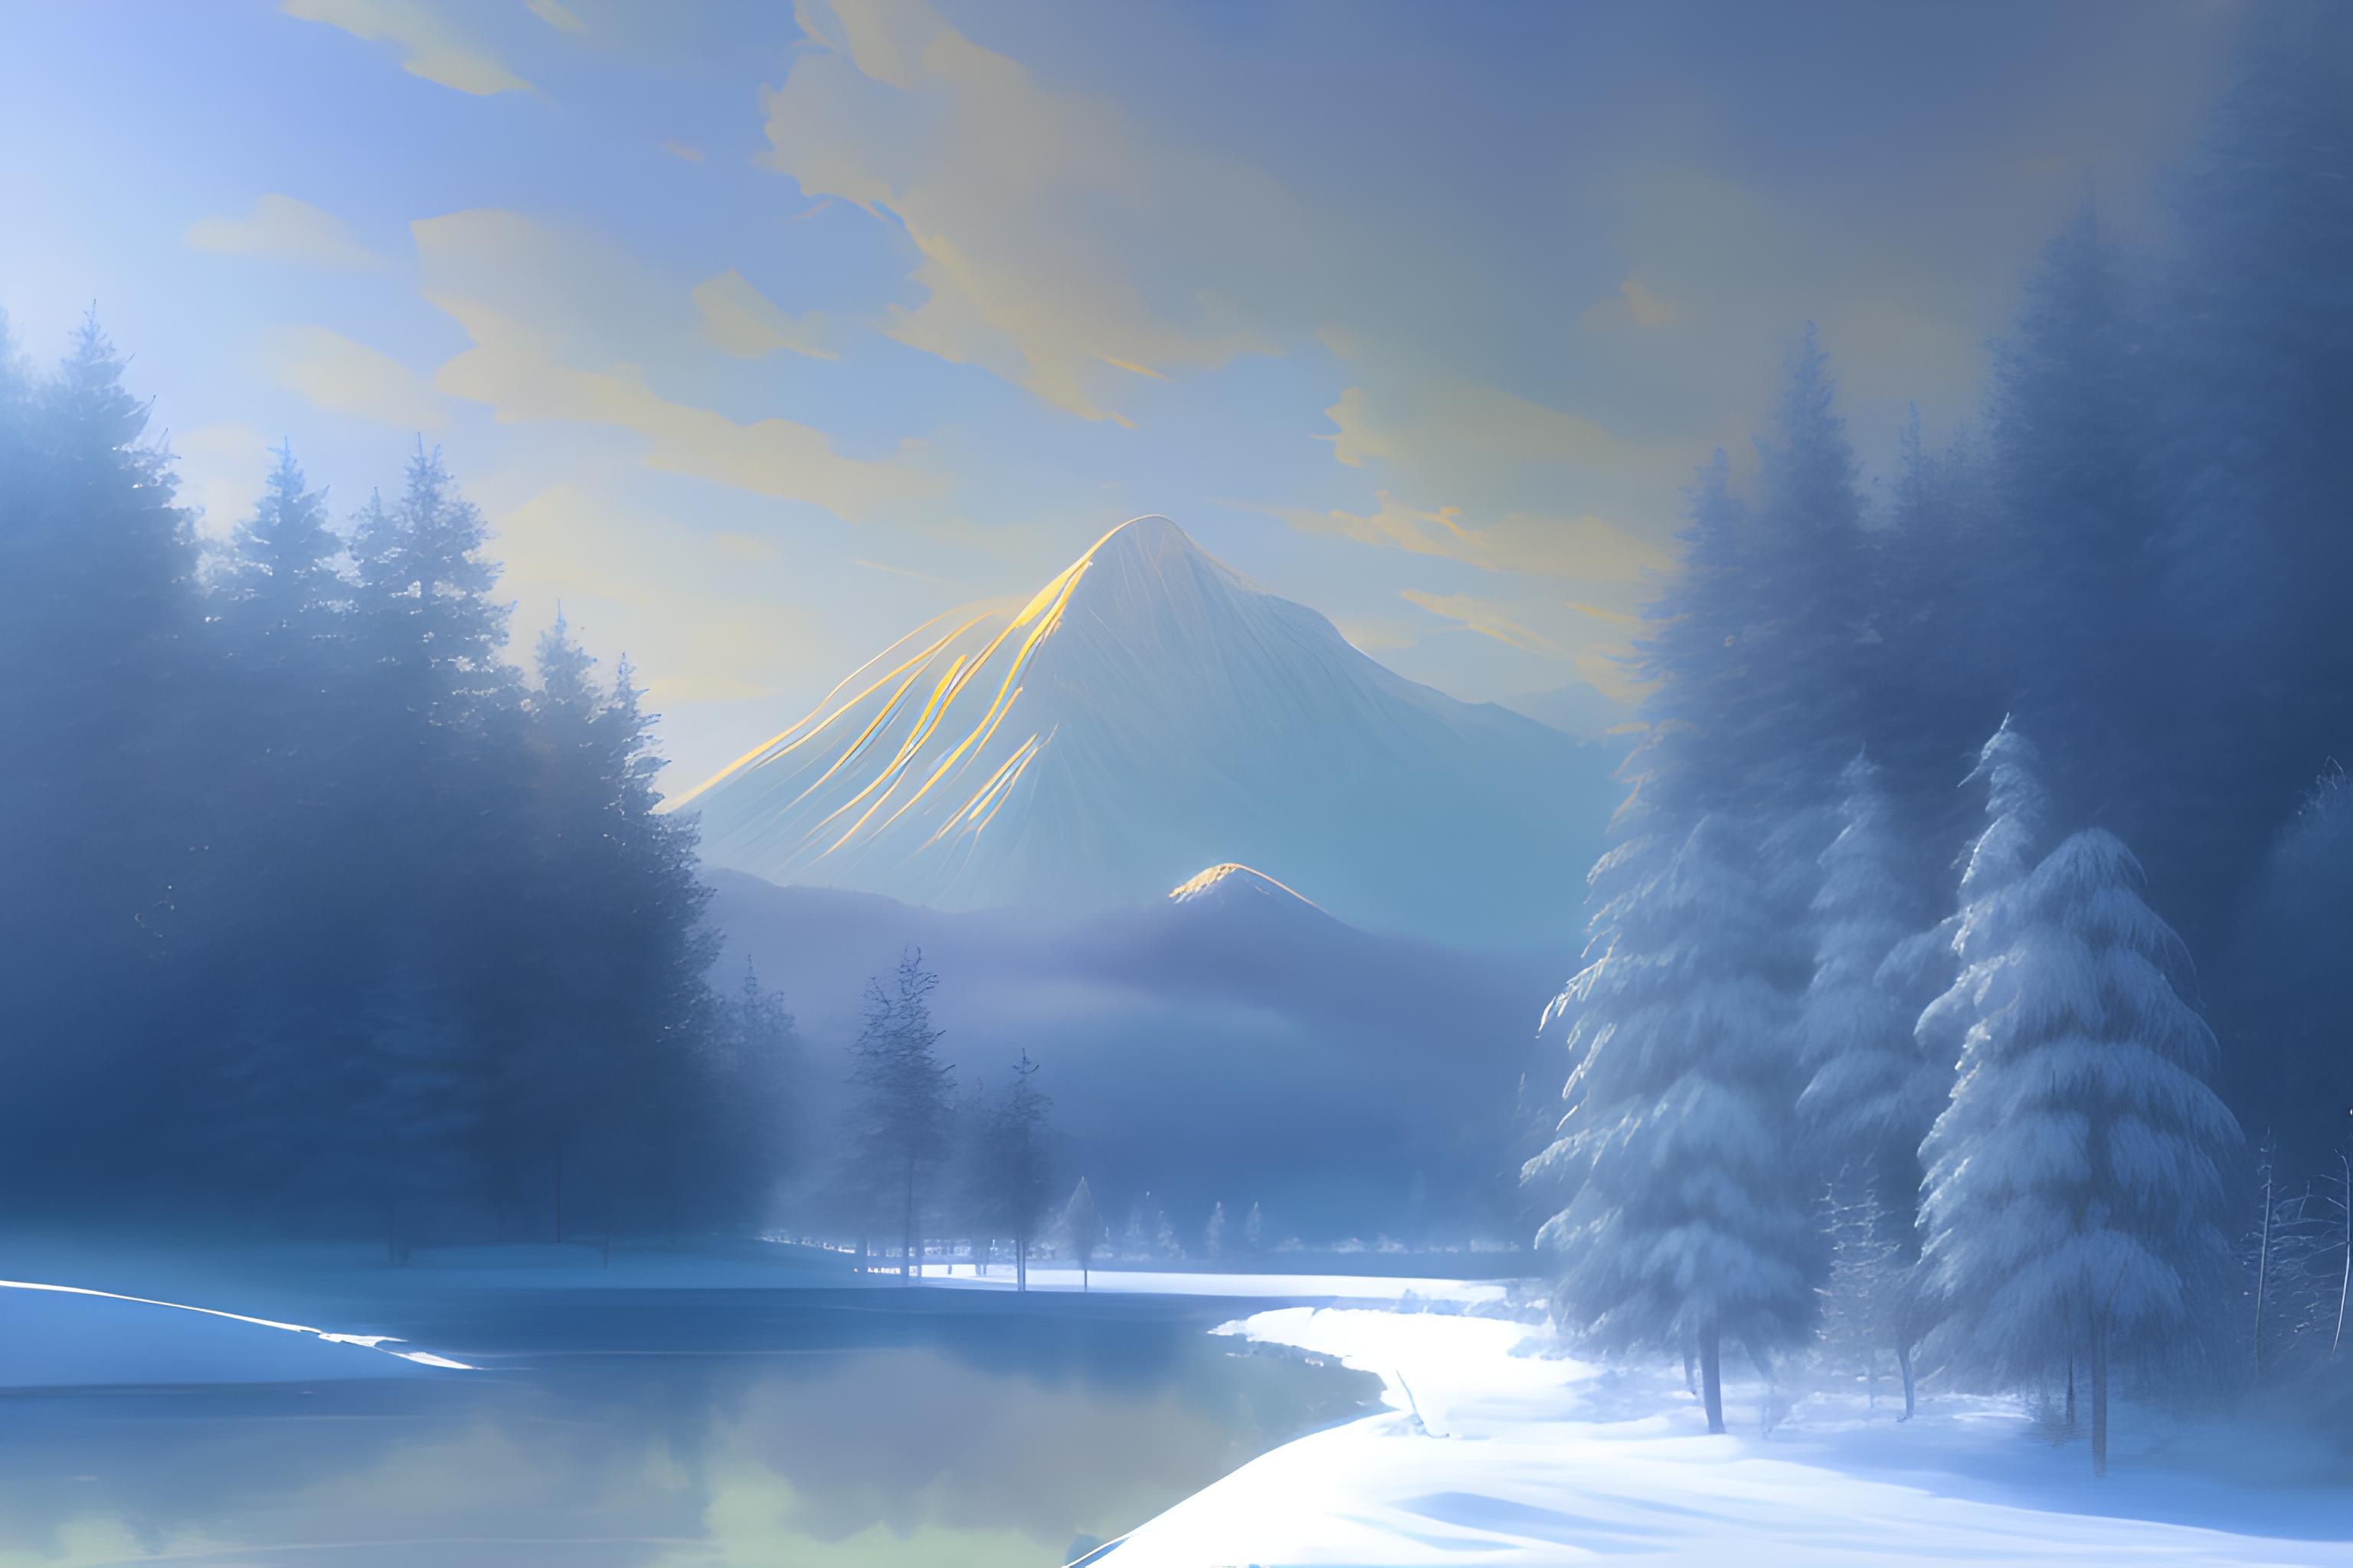 Digital Painting Winter In The Forest Illustration 4k Wallpaper